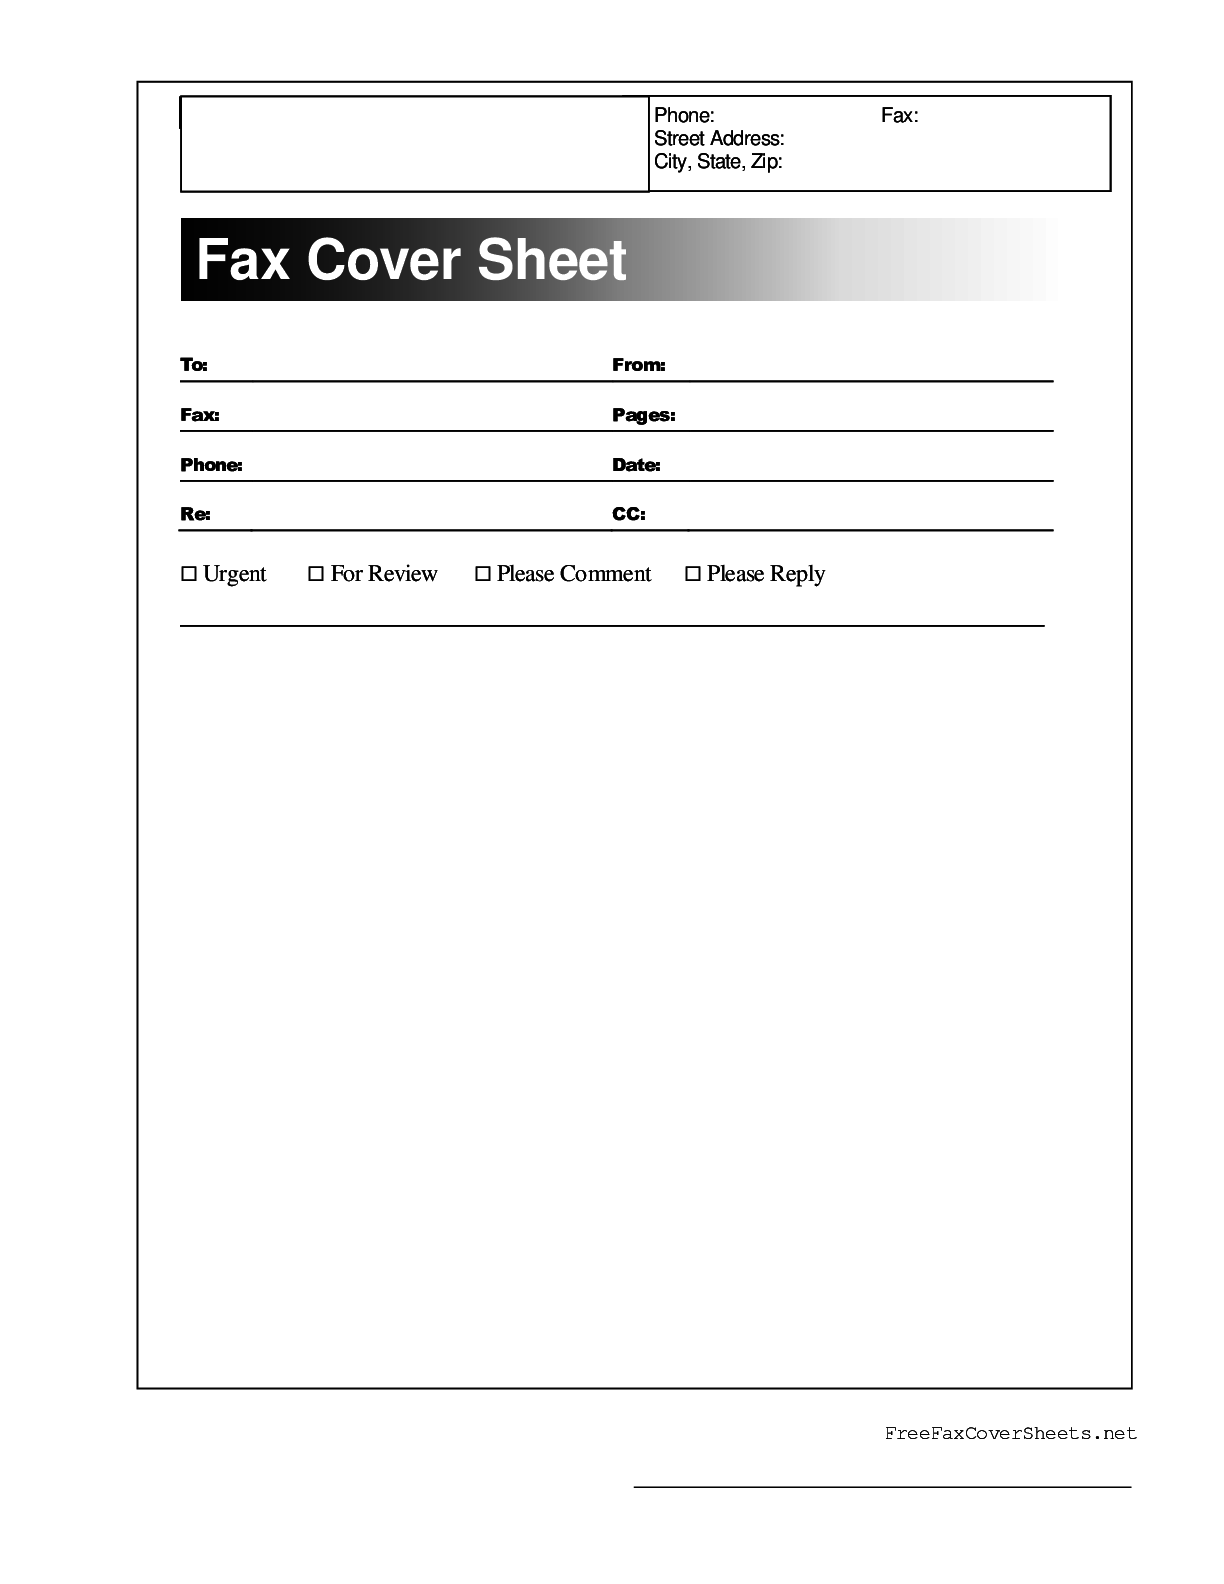 fax-cover-sheet-fillable-pdf-fax-cover-sheet-printable